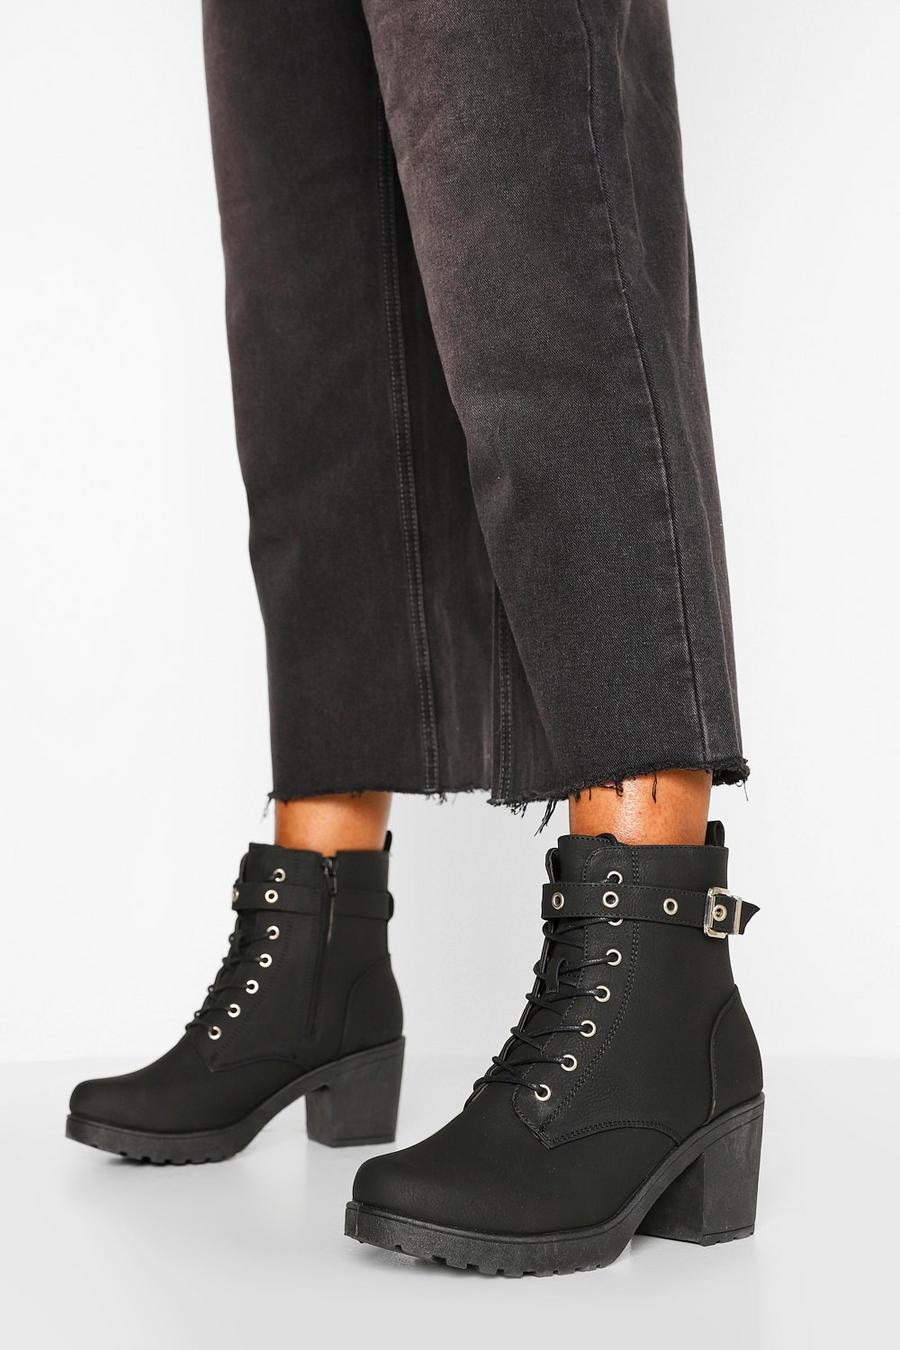 Black Wide Width Buckle Lace Up Chunky Combat Boots